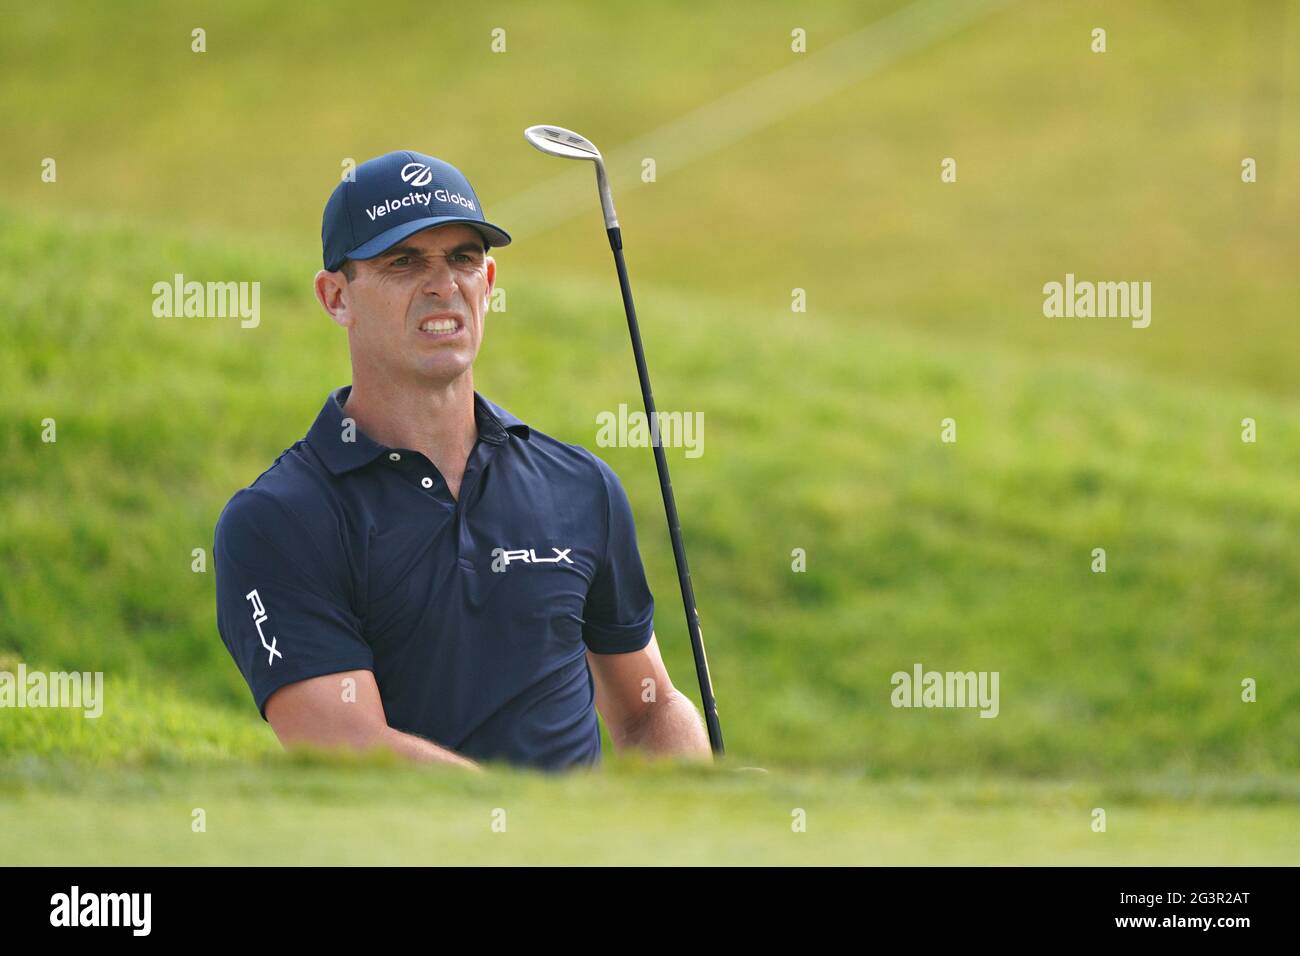 San Diego, United States. 17th June, 2021. Billy Horschel of the USA, reacts after just missing a bunker shot on the tenth hole during the first day of competition at the 121st US Open Championship at Torrey Pines Golf Course in San Diego, California on Thursday, June 17, 2021. Photo by Richard Ellis/UPI Credit: UPI/Alamy Live News Stock Photo